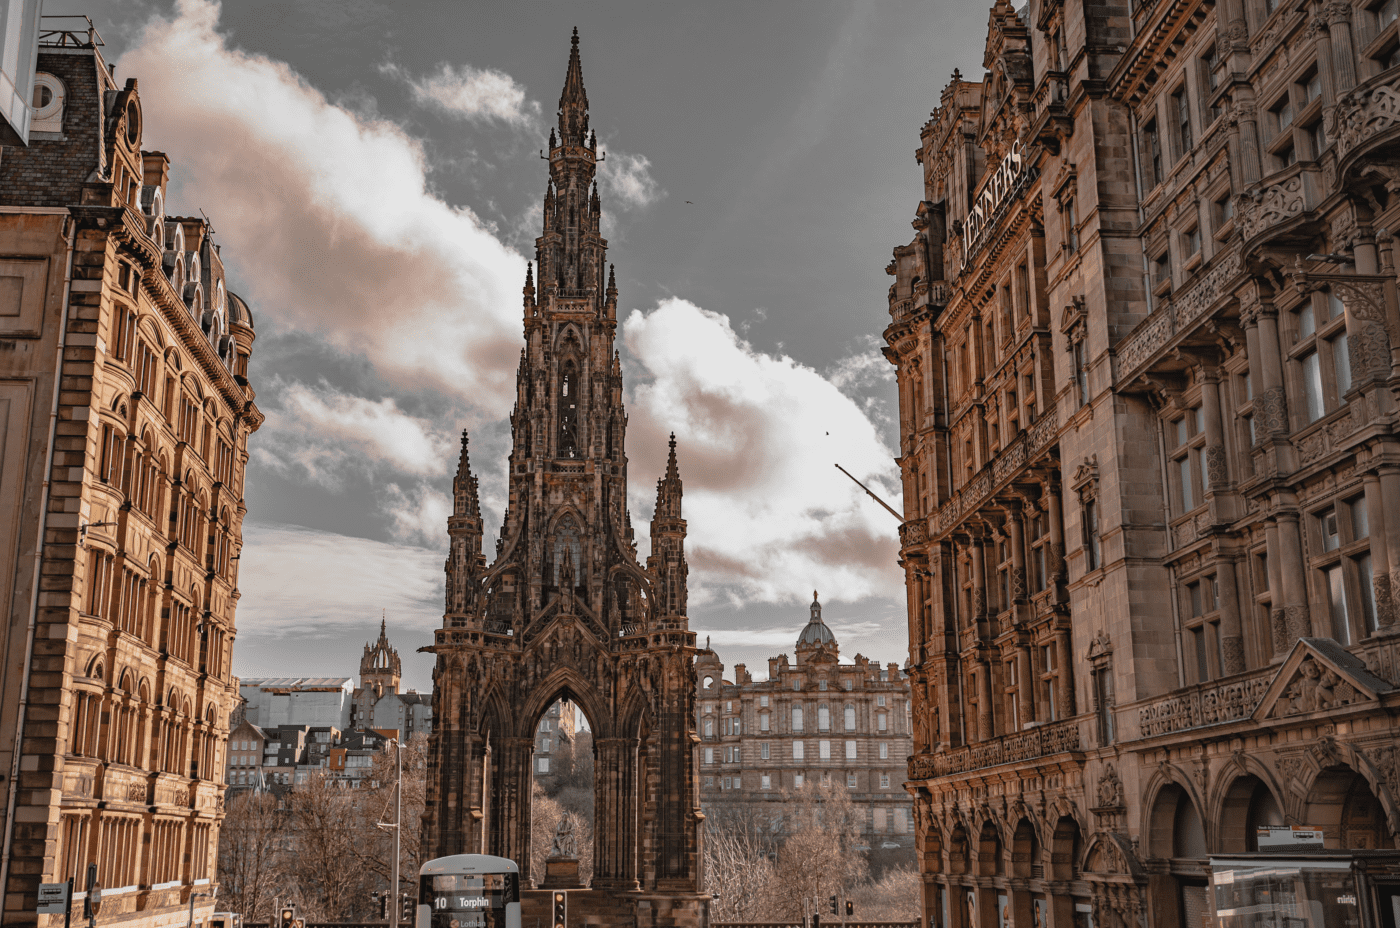 The Scott Monument Tower and statue of Sir Walter Scott, located on Prince's Street, Edinburgh.